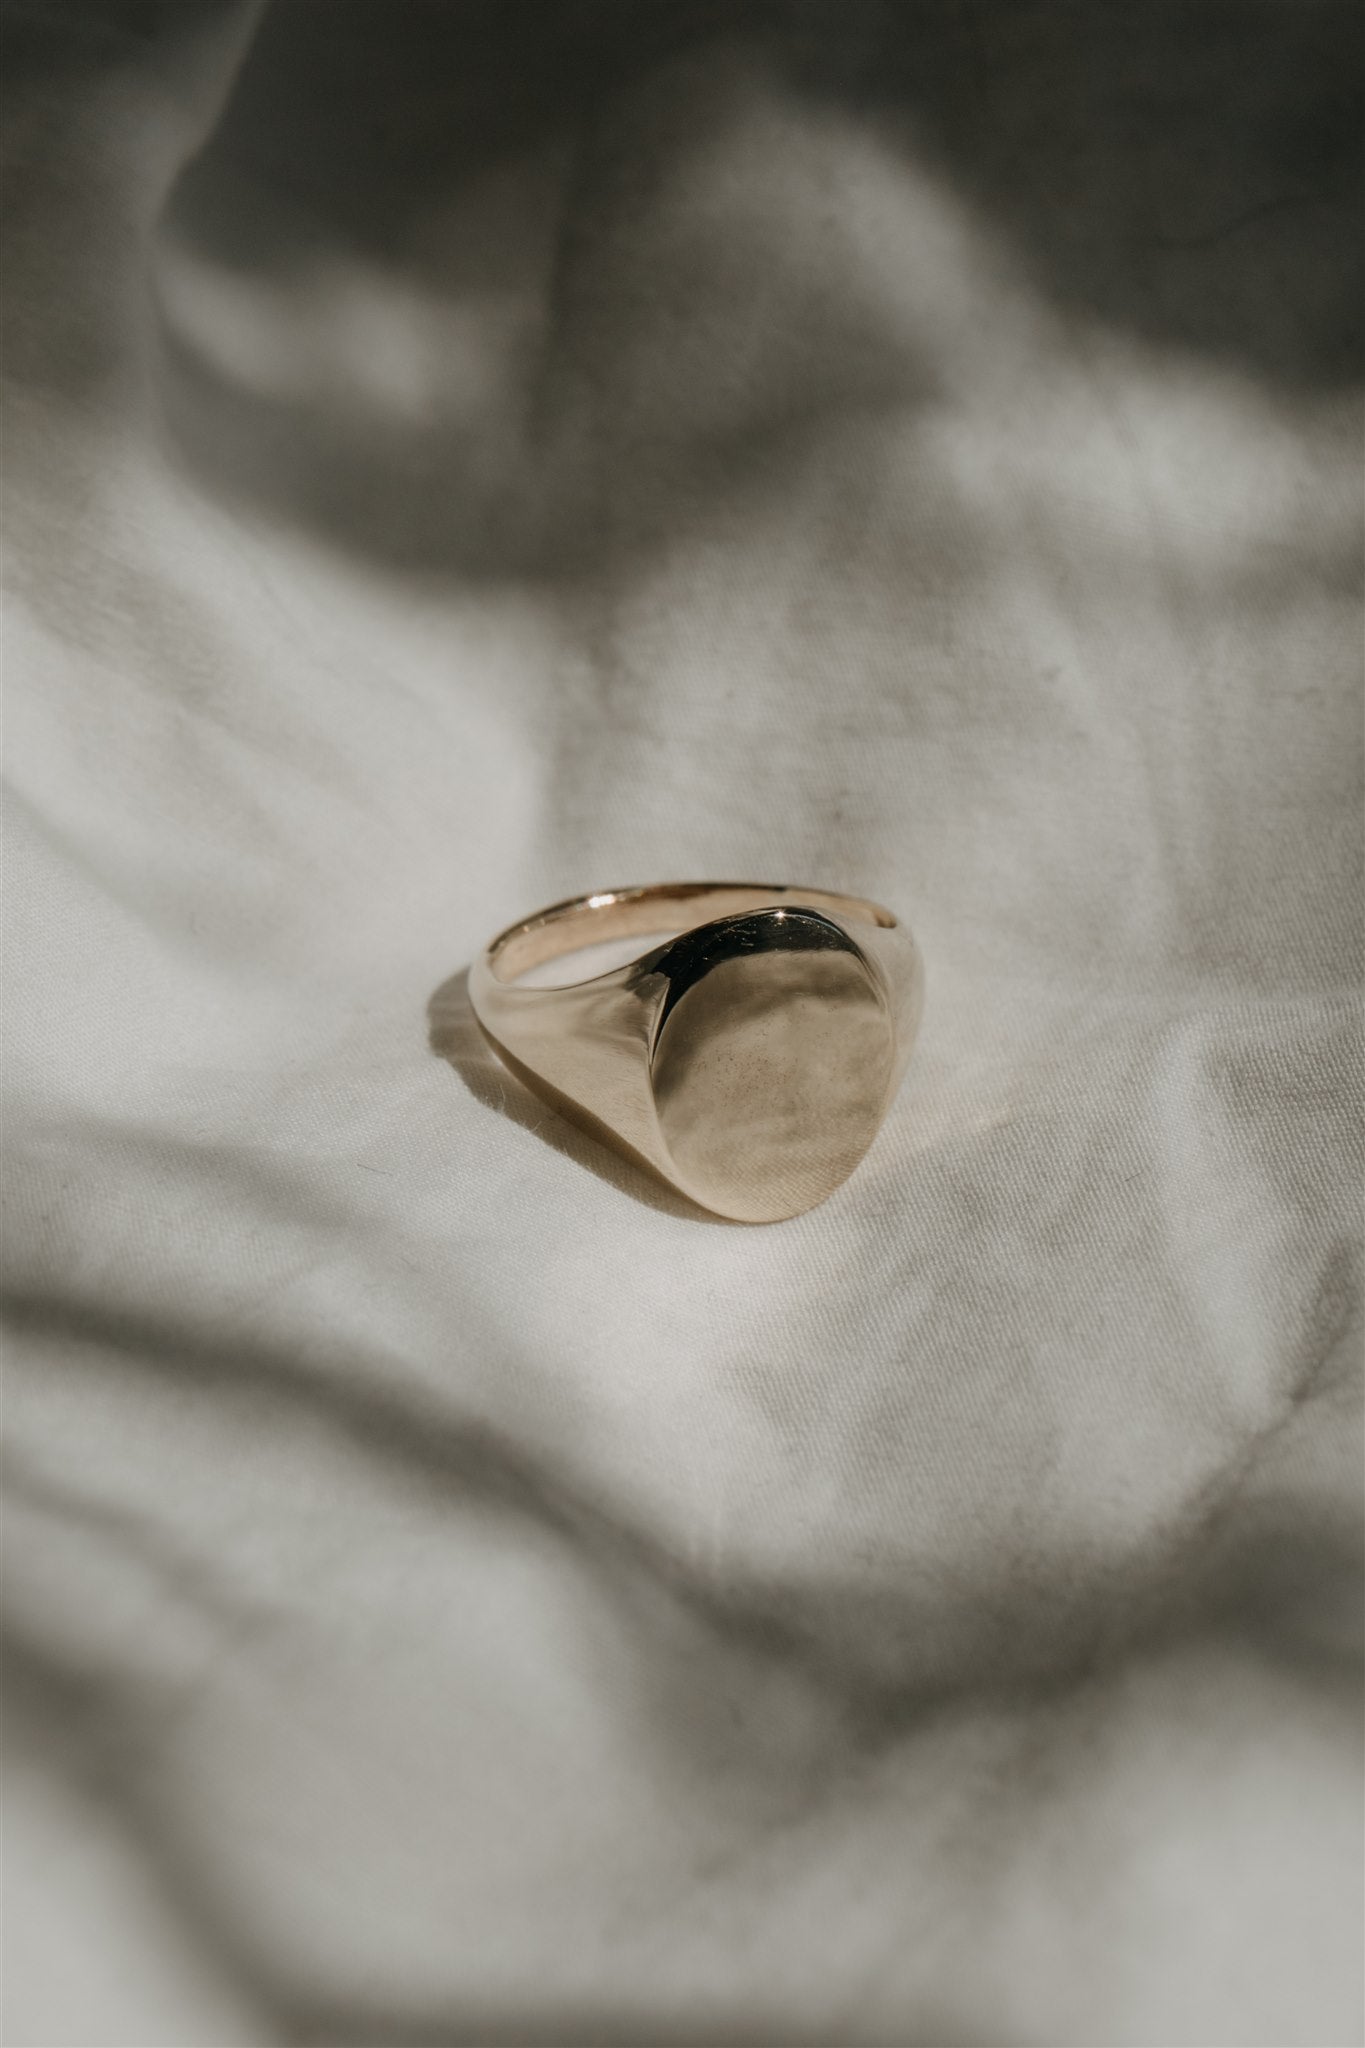 The Signet Ring